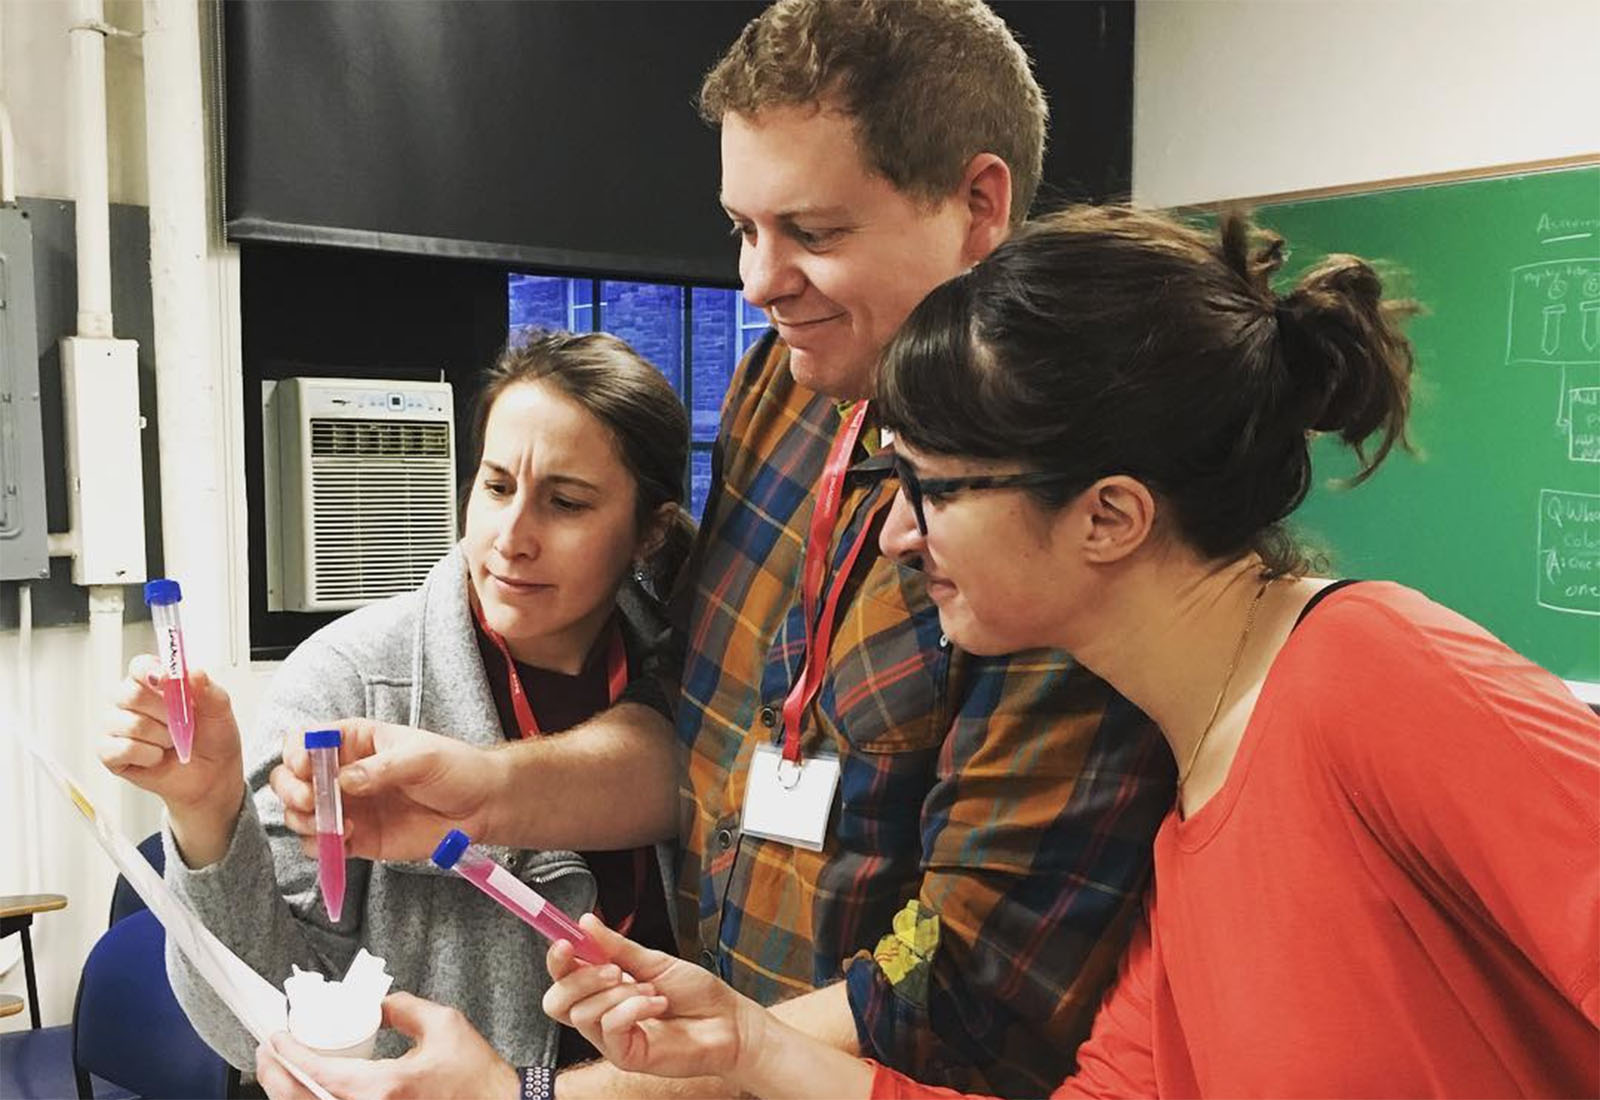 Student engagement fellows train Citizen Science faculty on their water-themed outreach experiments. Photo: @bardcce on Instagram